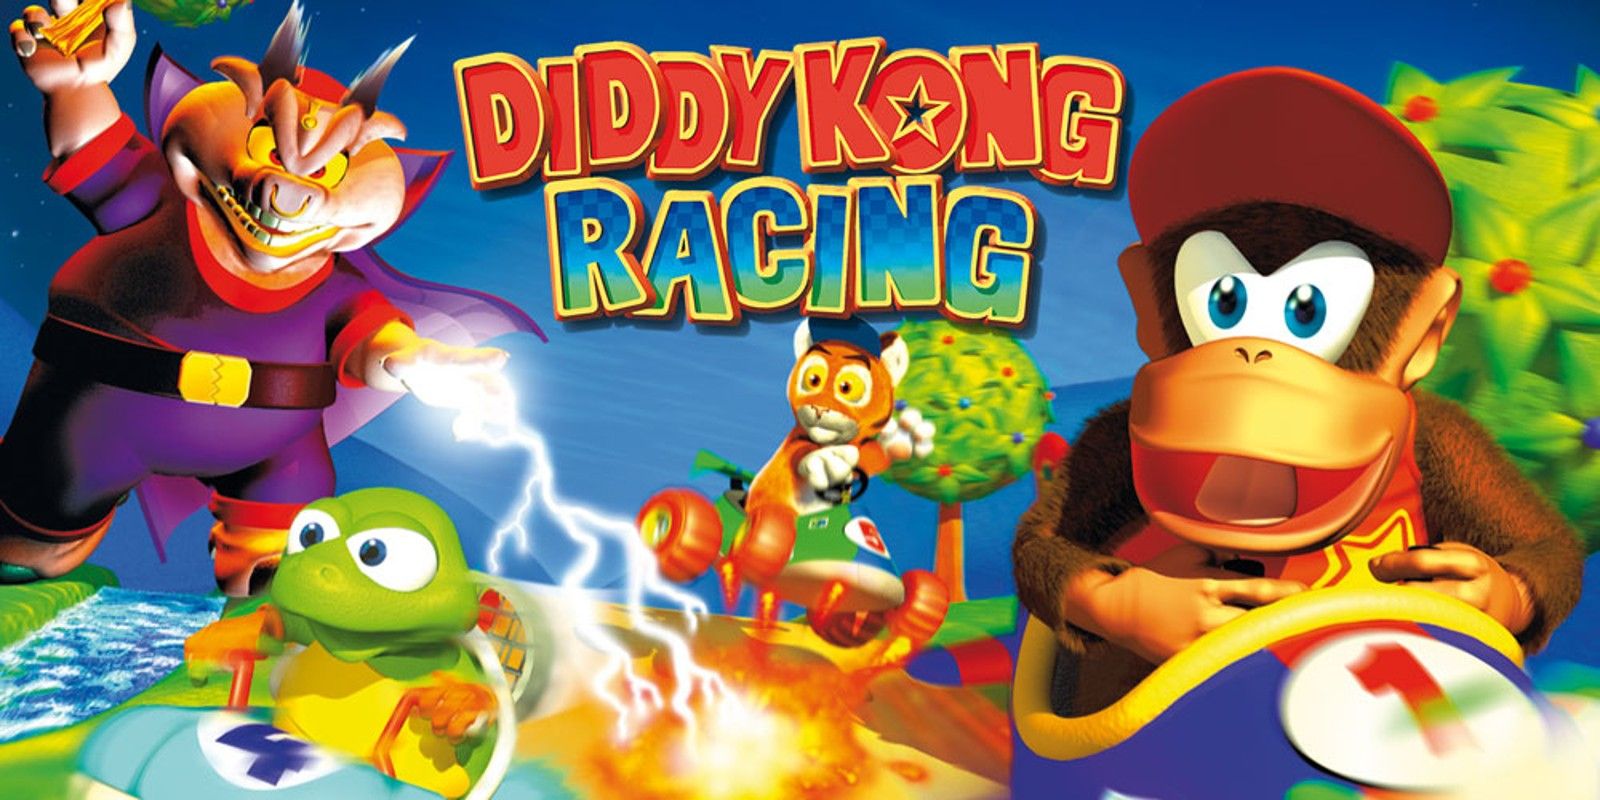 An image of the promotional art for Diddy Kong Racing on the N64